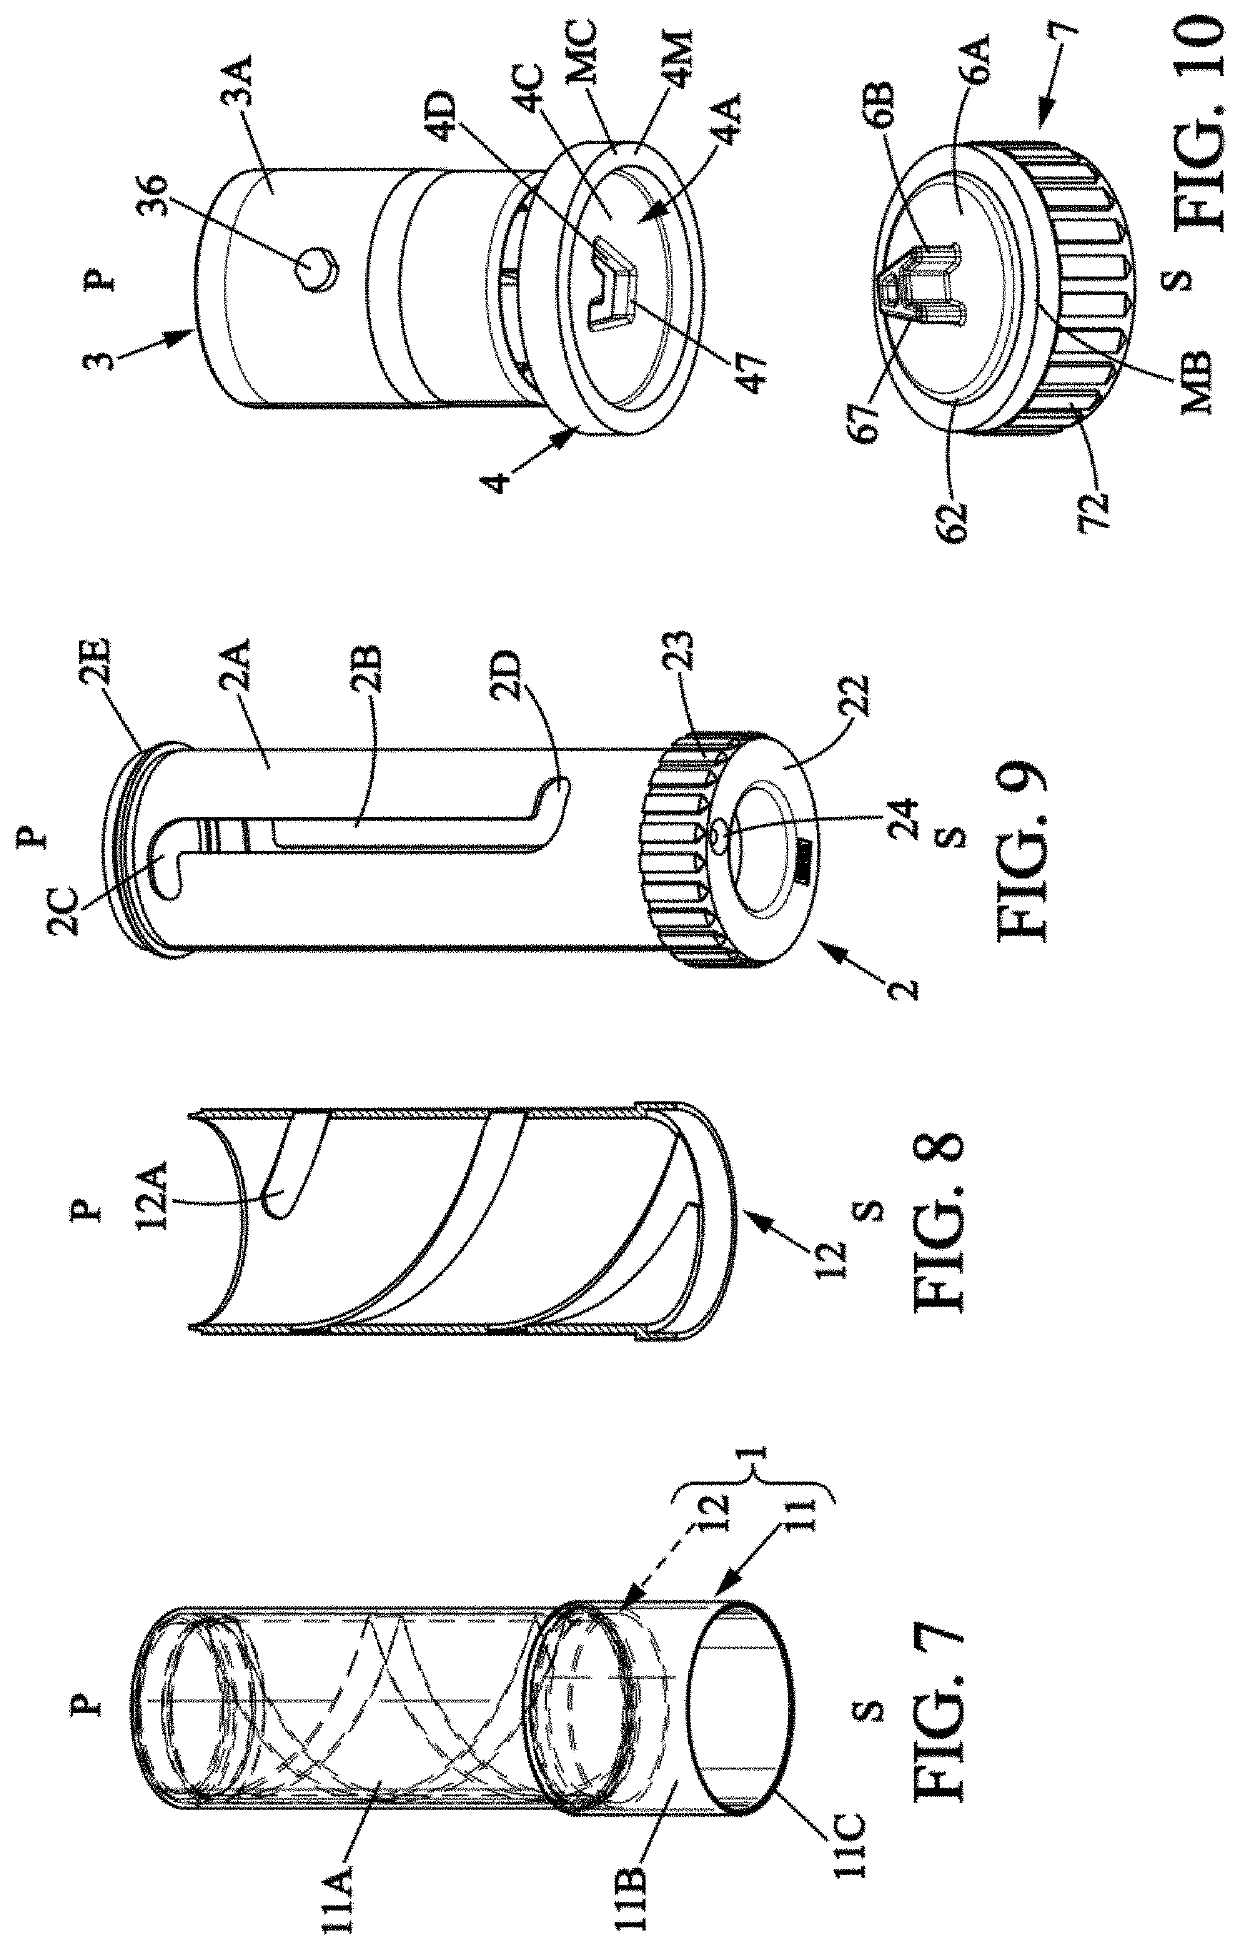 Cosmetic product dispensing device, comprising a base and a cartridge designed to be detachably intercoupled